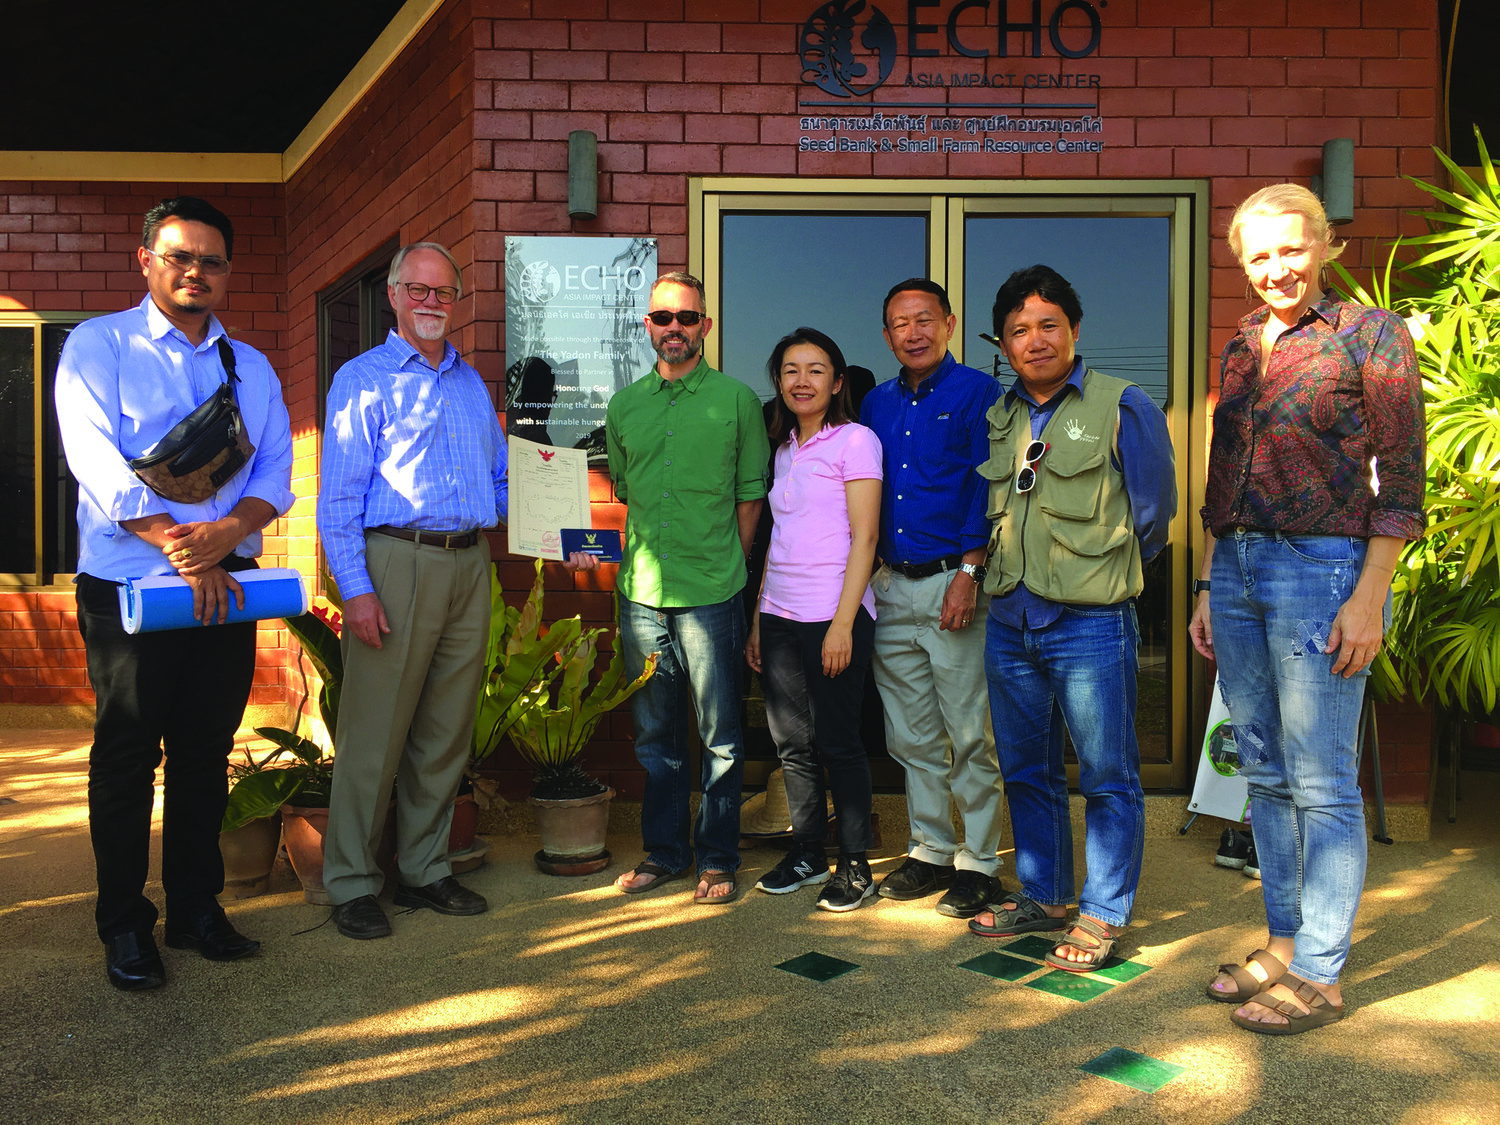 David Erickson was able to celebrate the generous donation of
land for the ECHO Asia Small Farm Resource Center with the team in
Chiang Mai, Thailand.